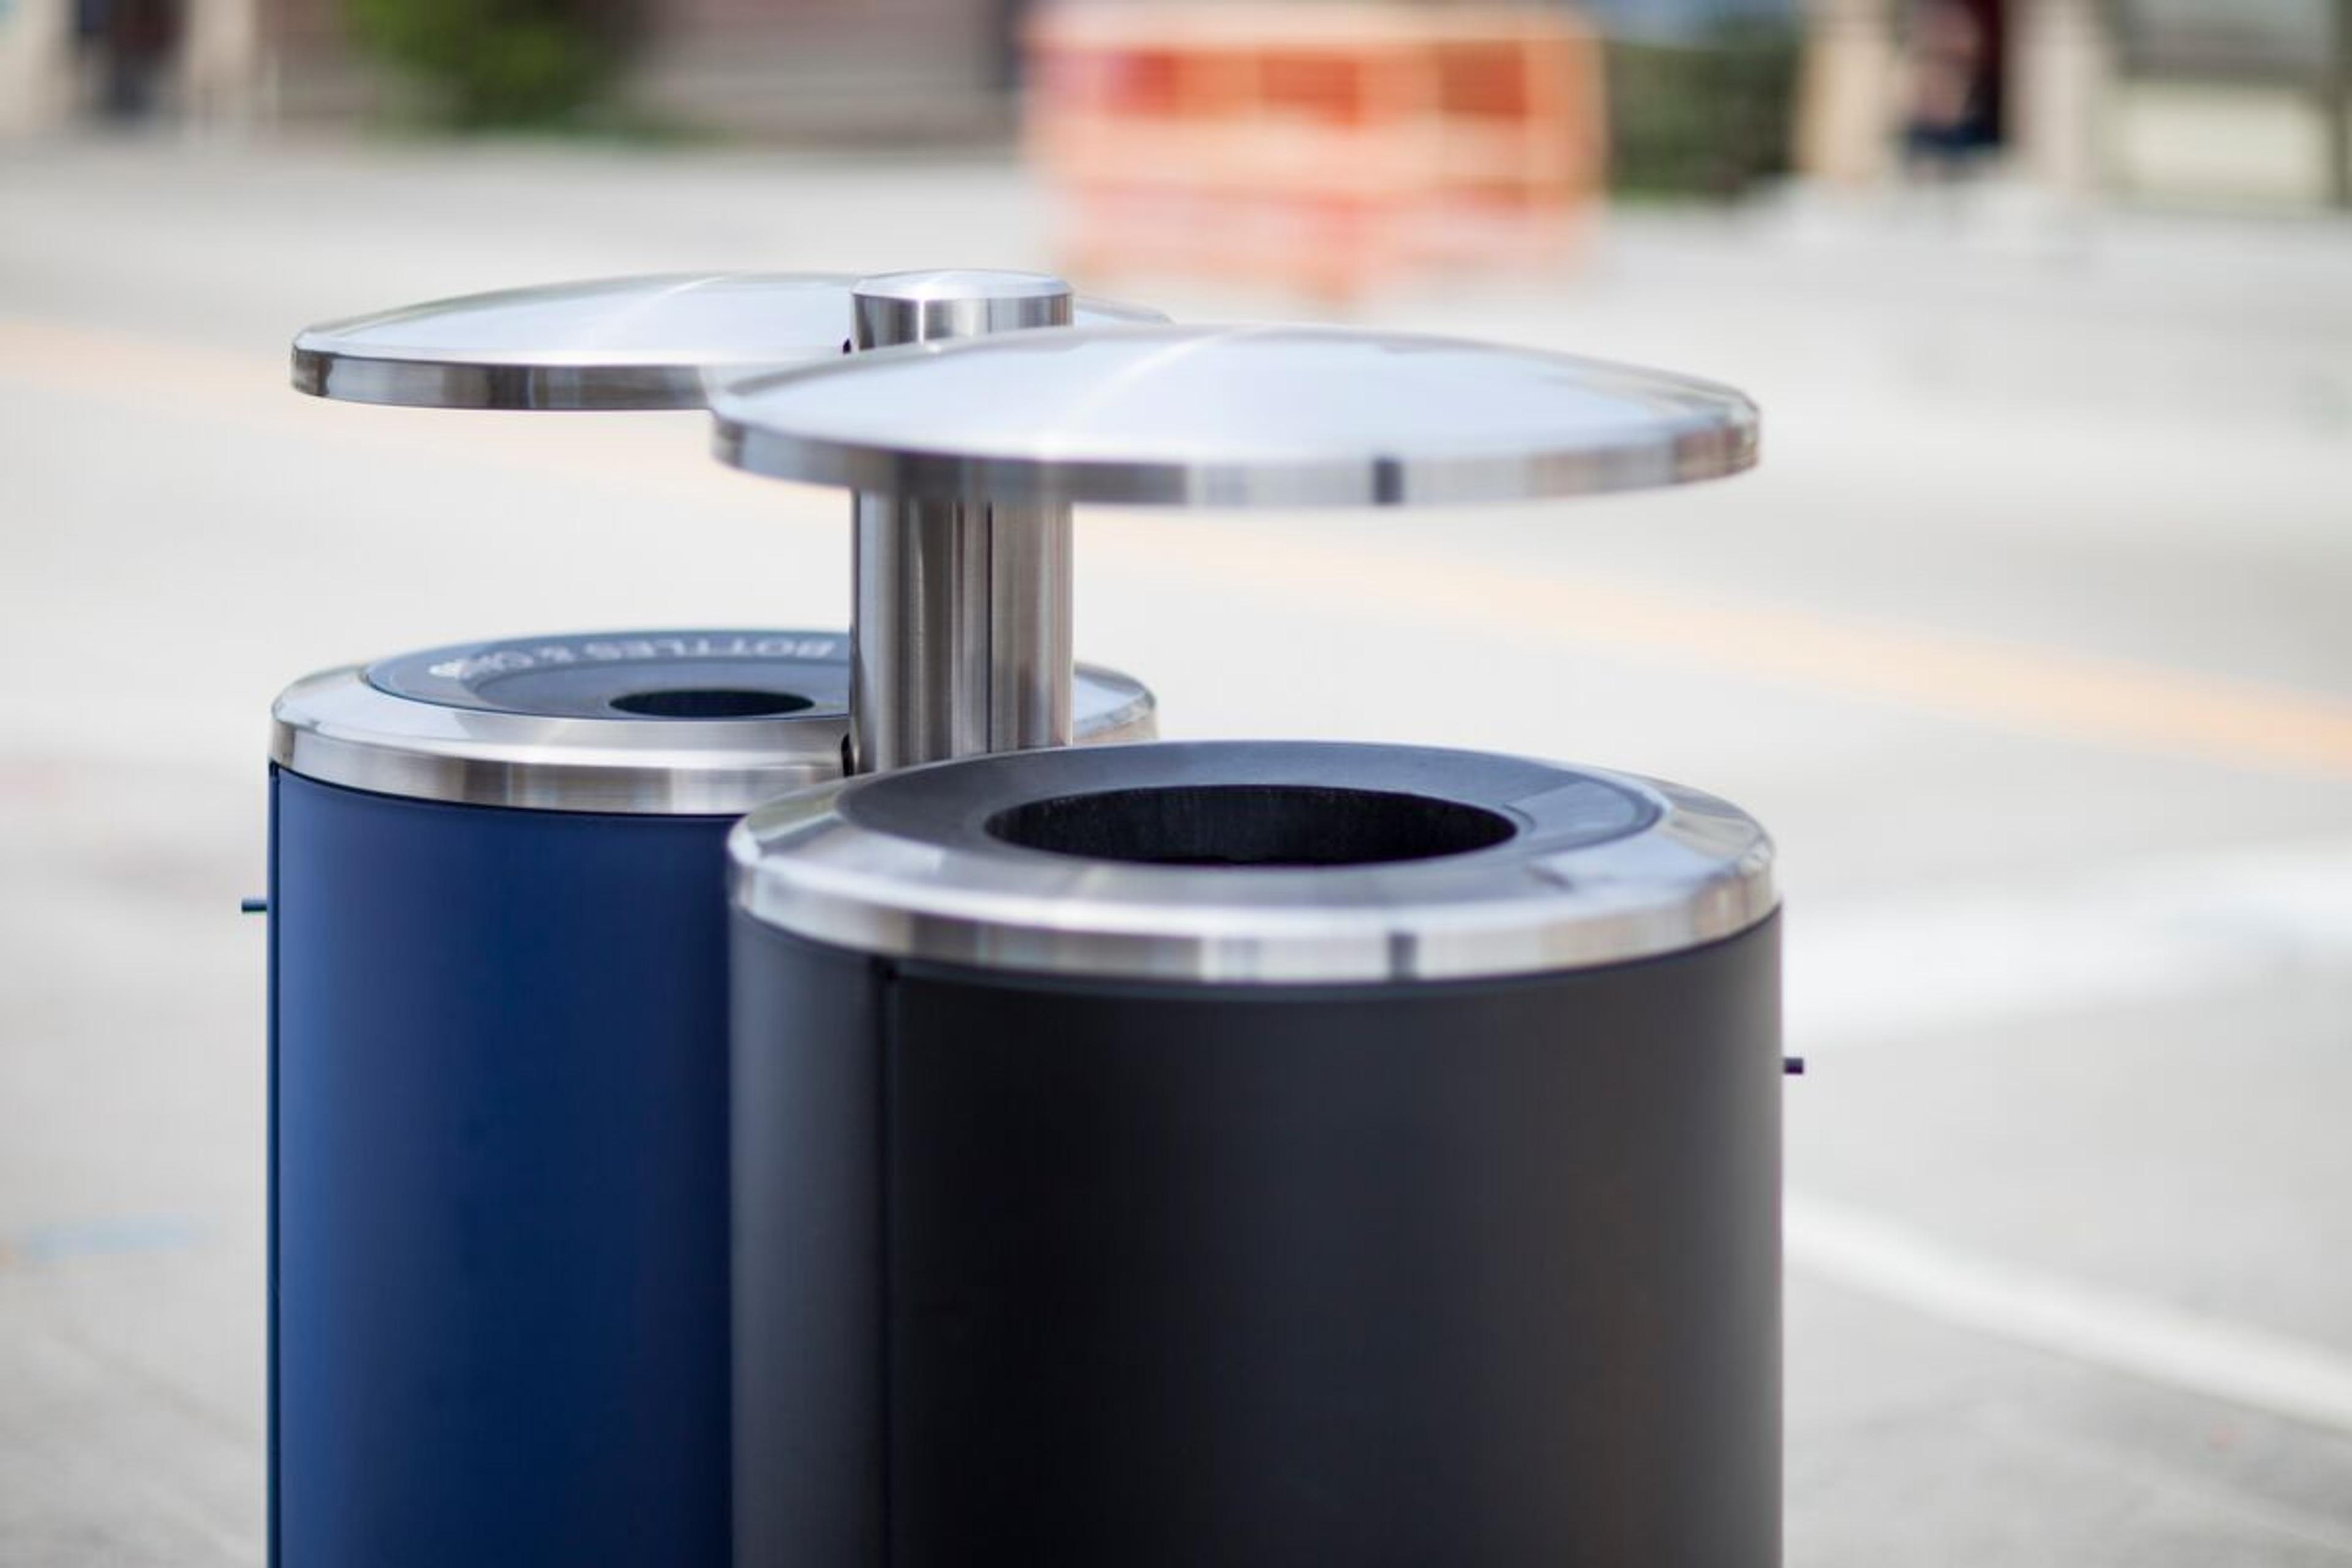 Custom stainless steel and aluminum receptacles keep waste in its place • Pole mount allows for easy walkway maintenance • Colors parallel the downtown streetscape • Pittsburgh, Pennsylvania